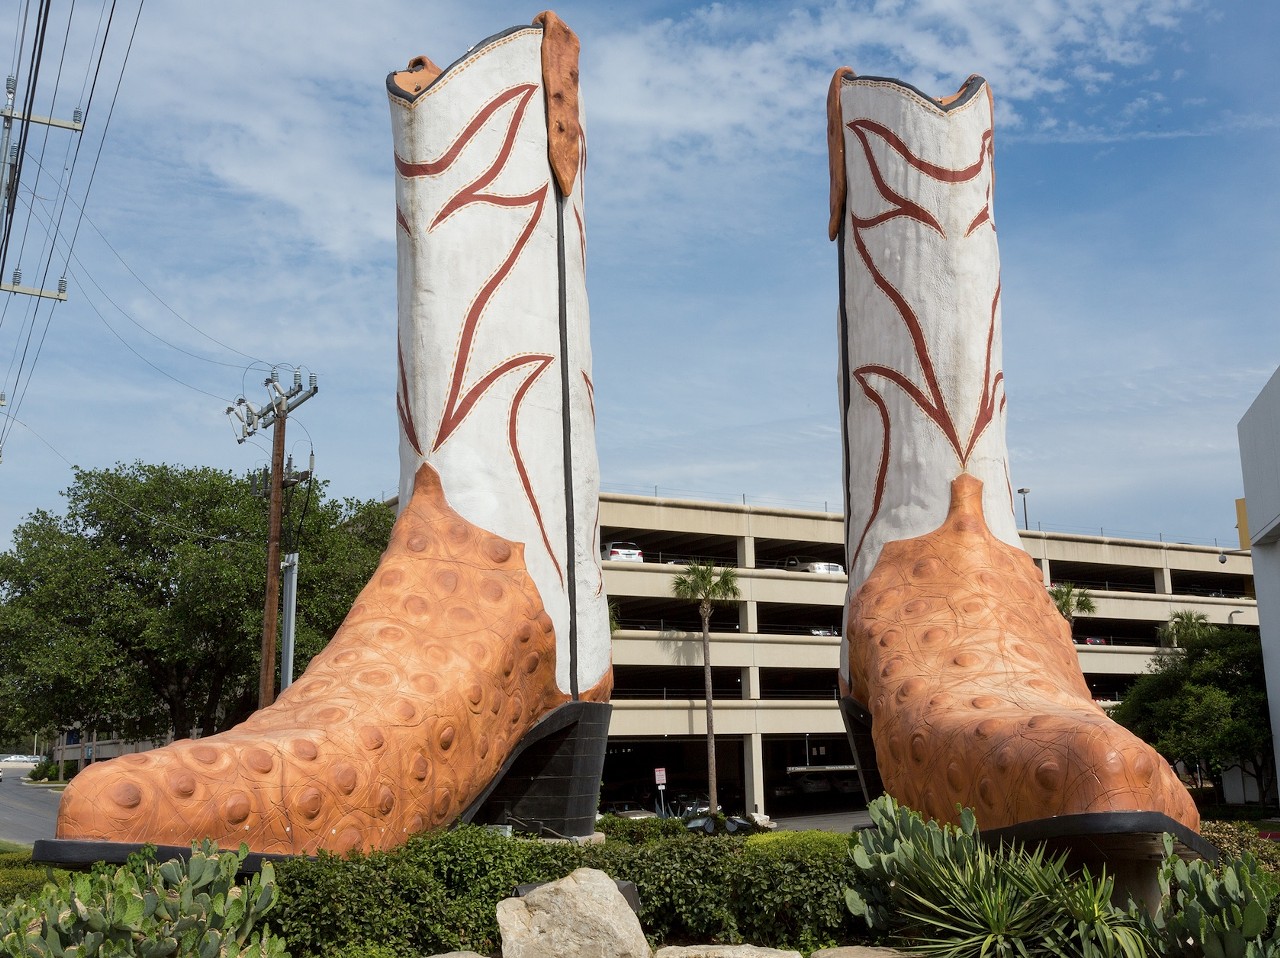 I painted the giant boots at North Star Mall in San Antonio : r/texas